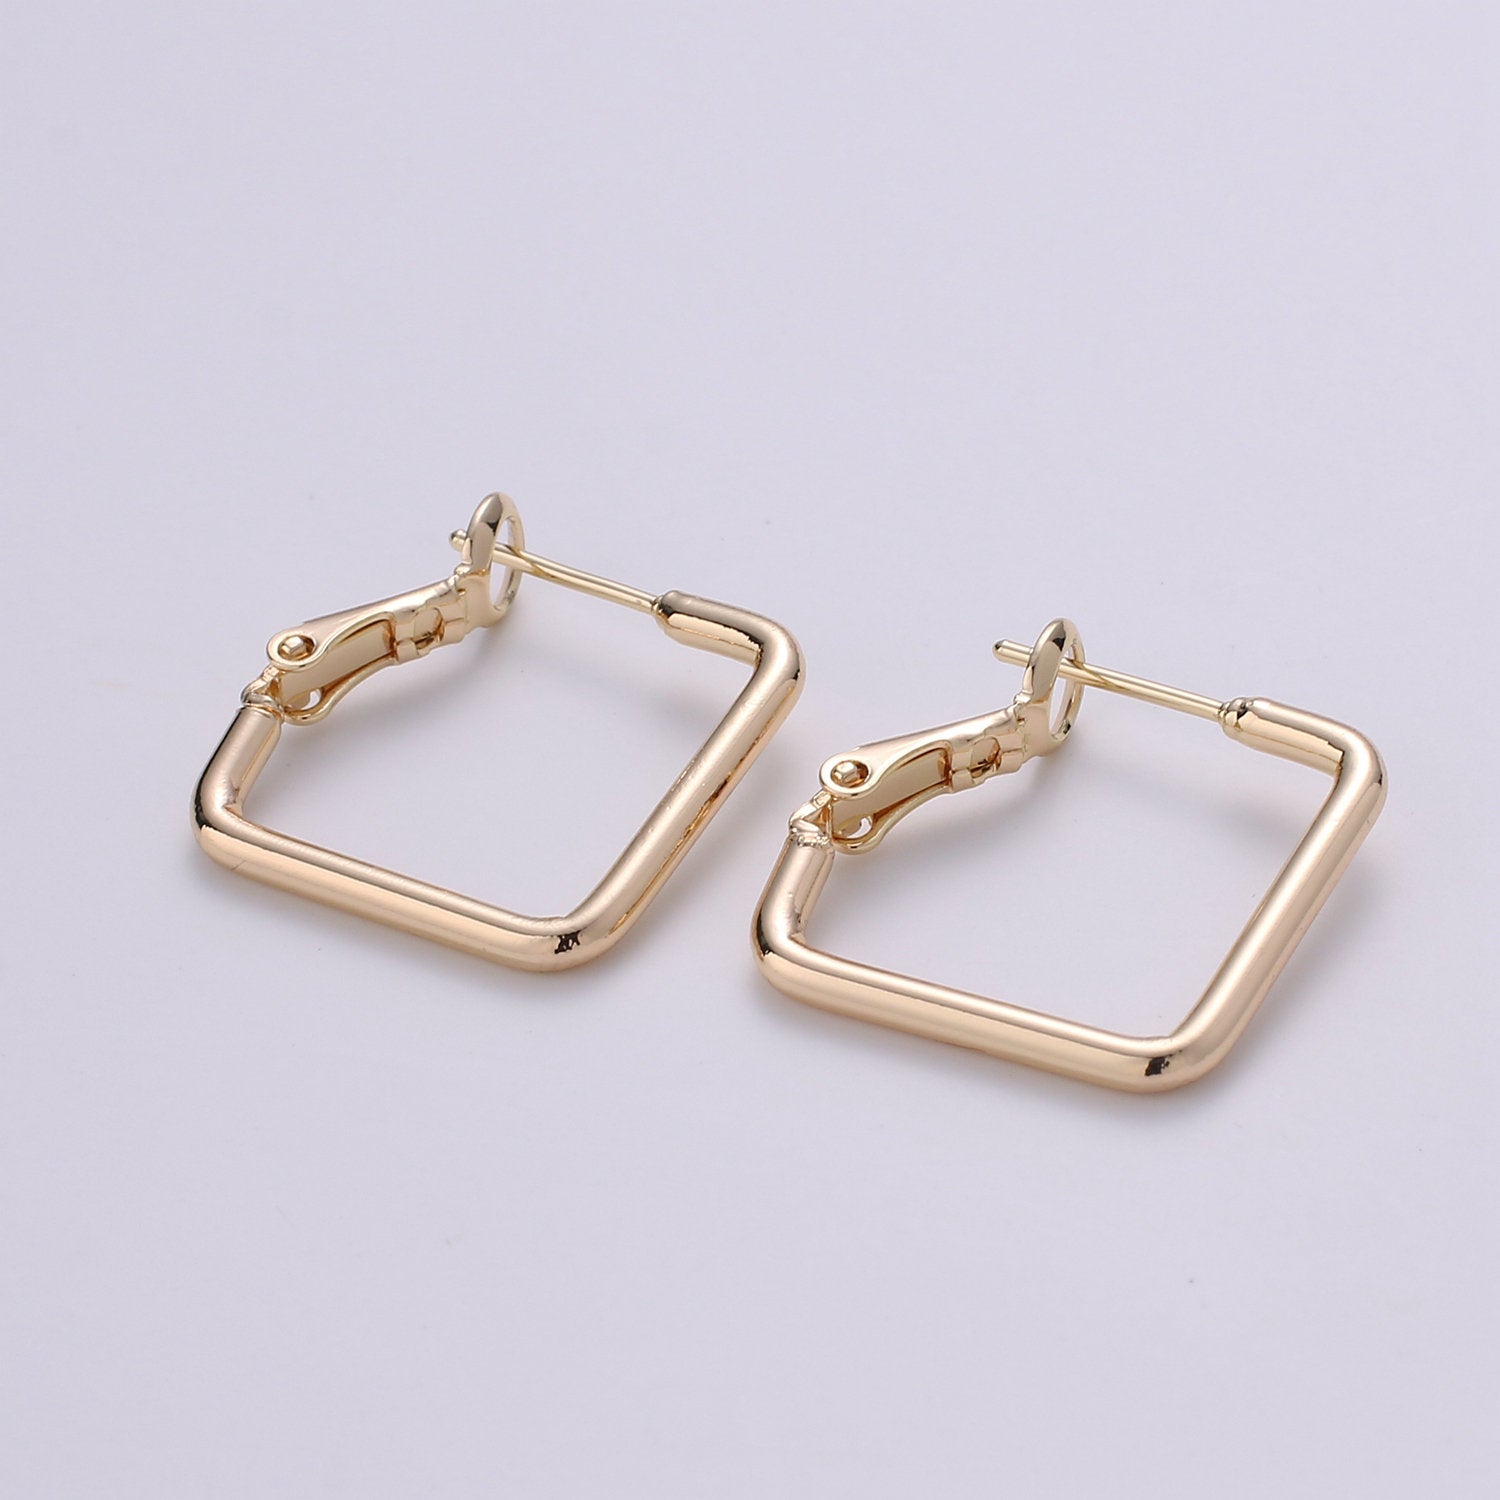 1 pair Geometric Ear Hoop Square Earring Hoop Findings for Necklace Jewelry Making in 18k Gold Filled - DLUXCA